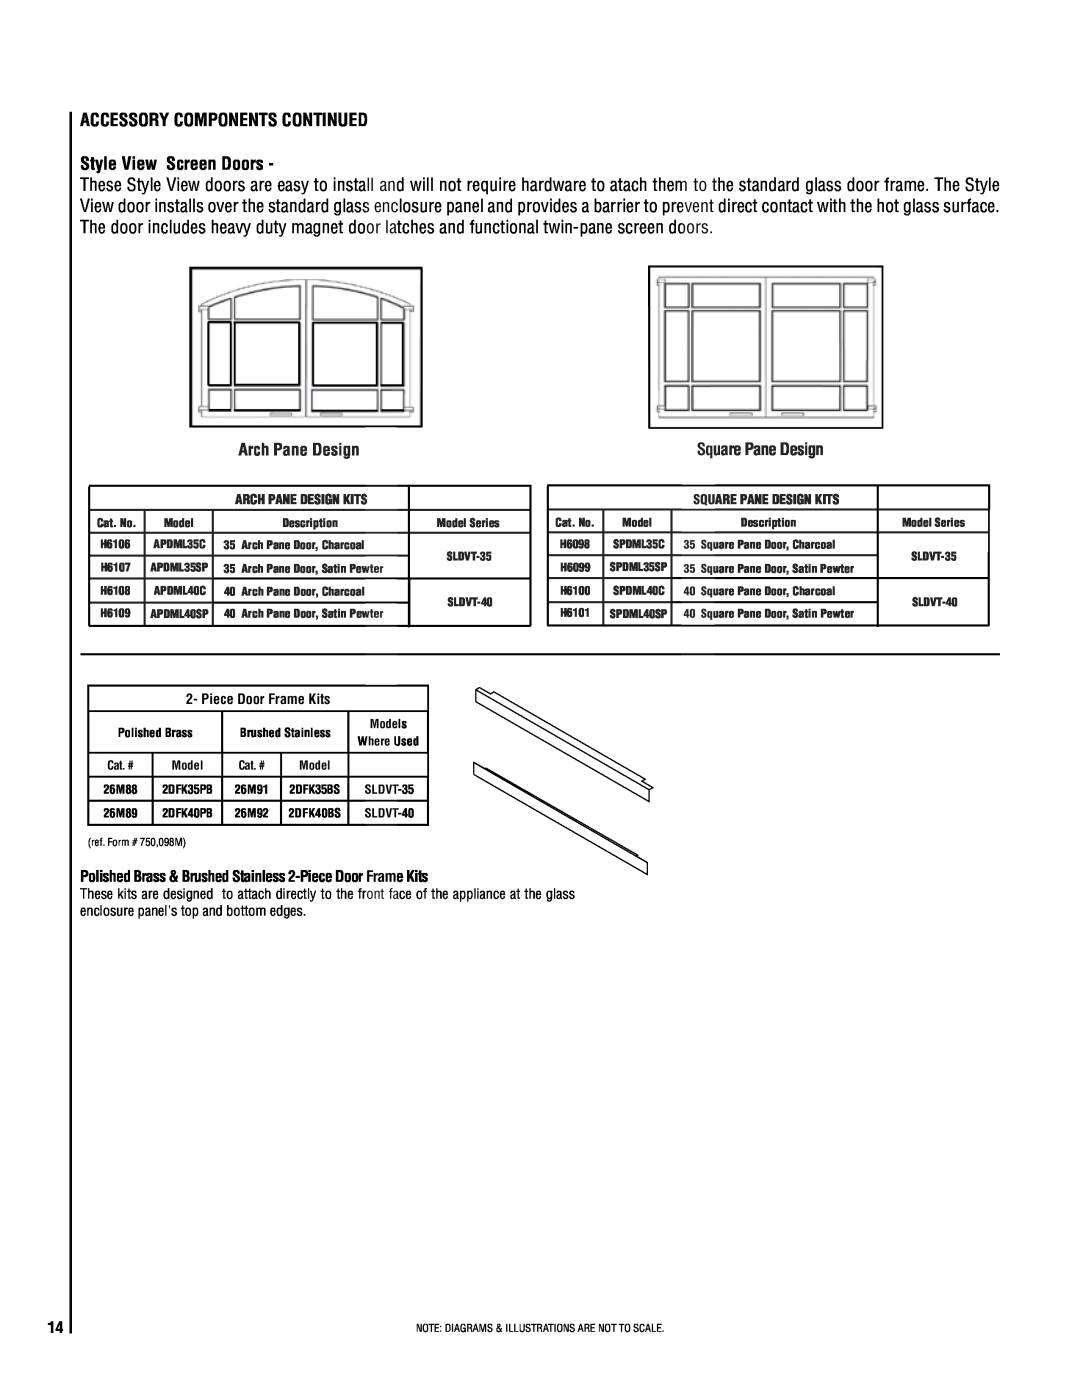 TOA Electronics SLDVT-40, SLDVT-35 manual Accessory Components CONTINUED, Style View Screen Doors, Arch Pane Design Kits 